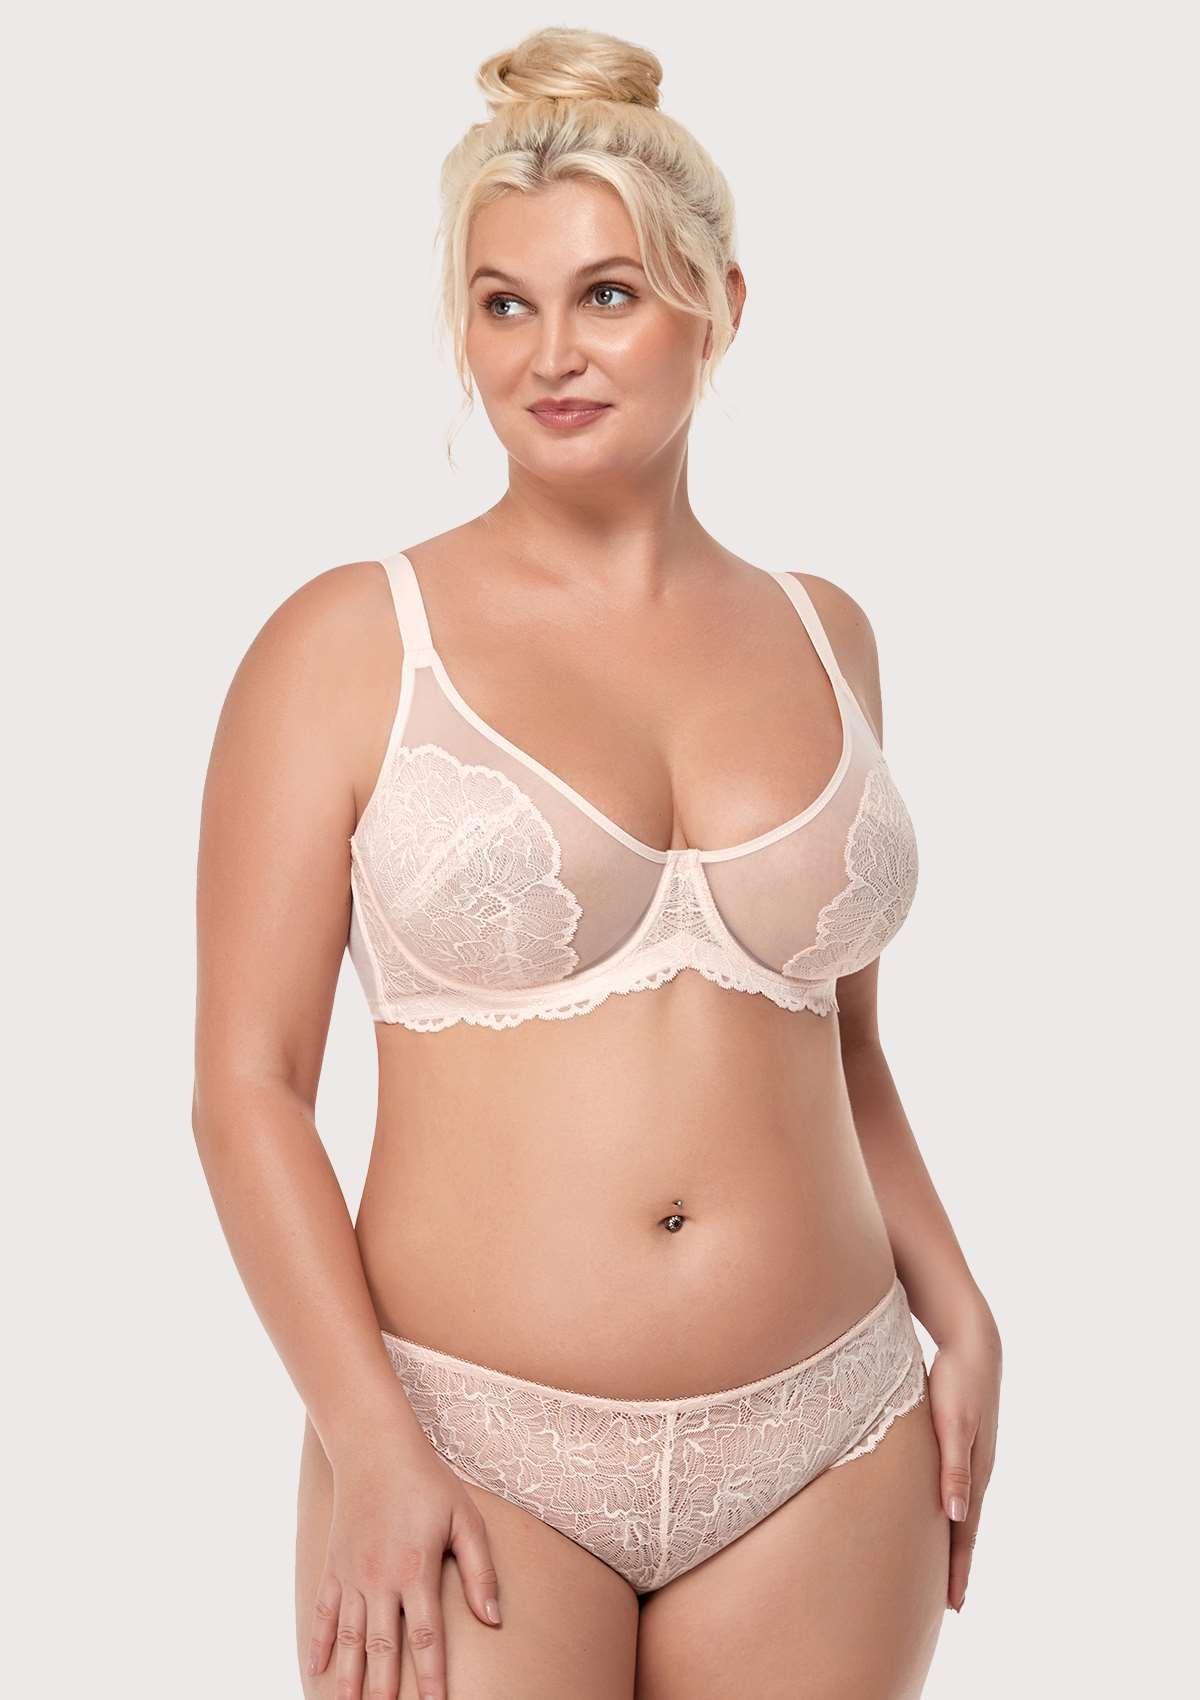 HSIA Blossom Matching Lacey Underwear And Bra Set: Sexy Lace Bra - Dusty Peach / 36 / G